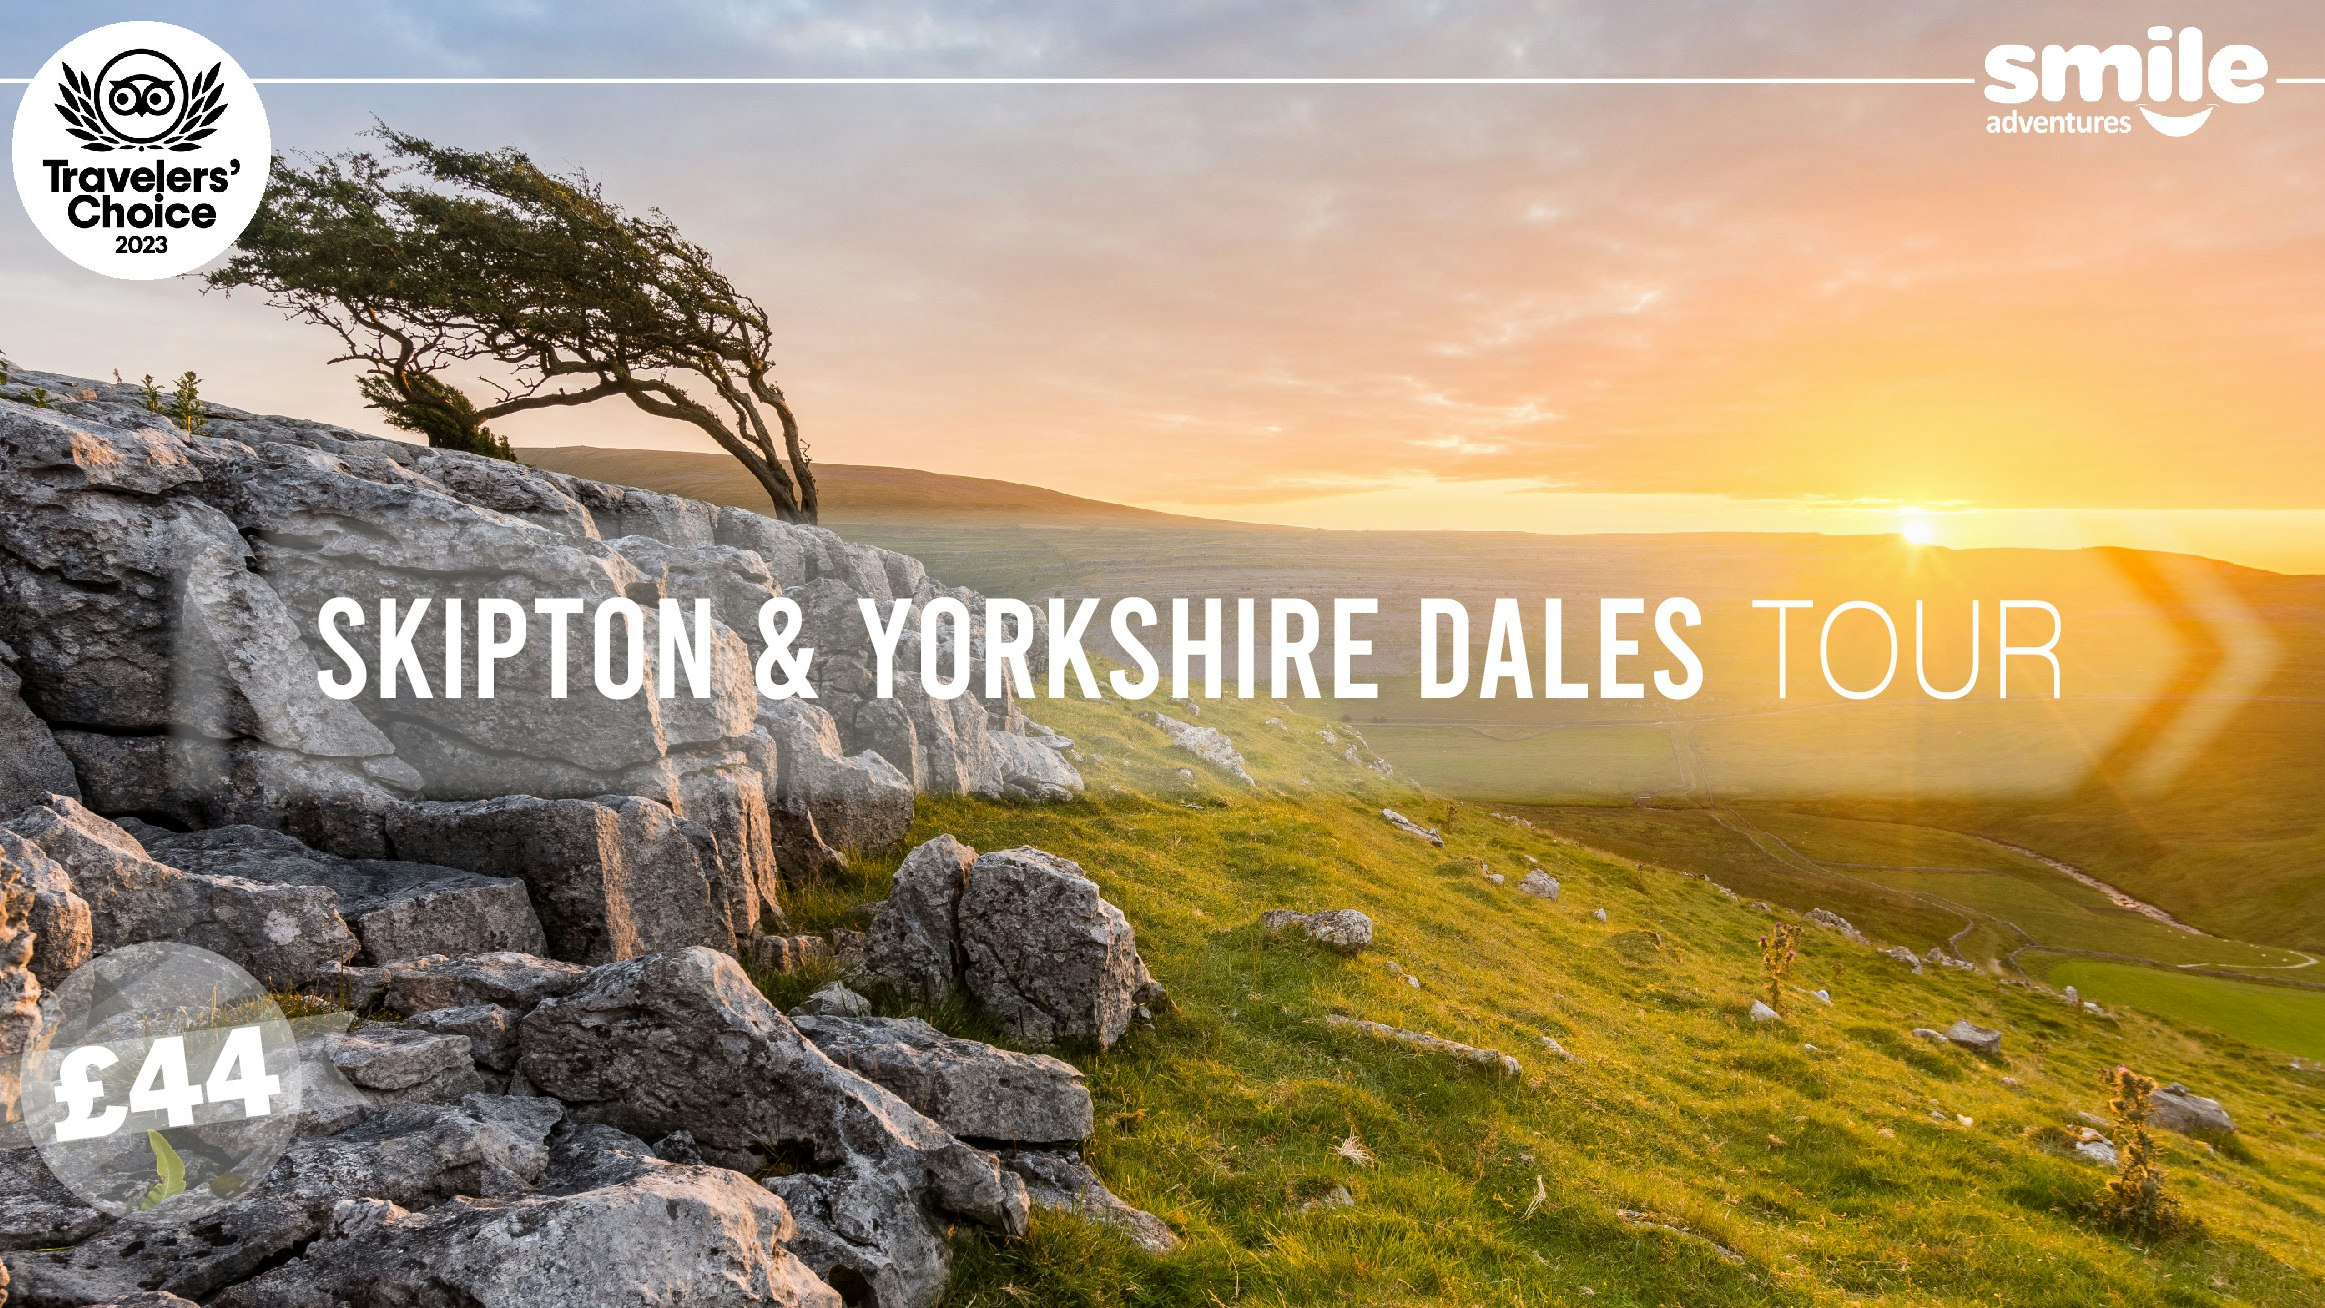 Skipton & Yorkshire Dales Tour – From Manchester